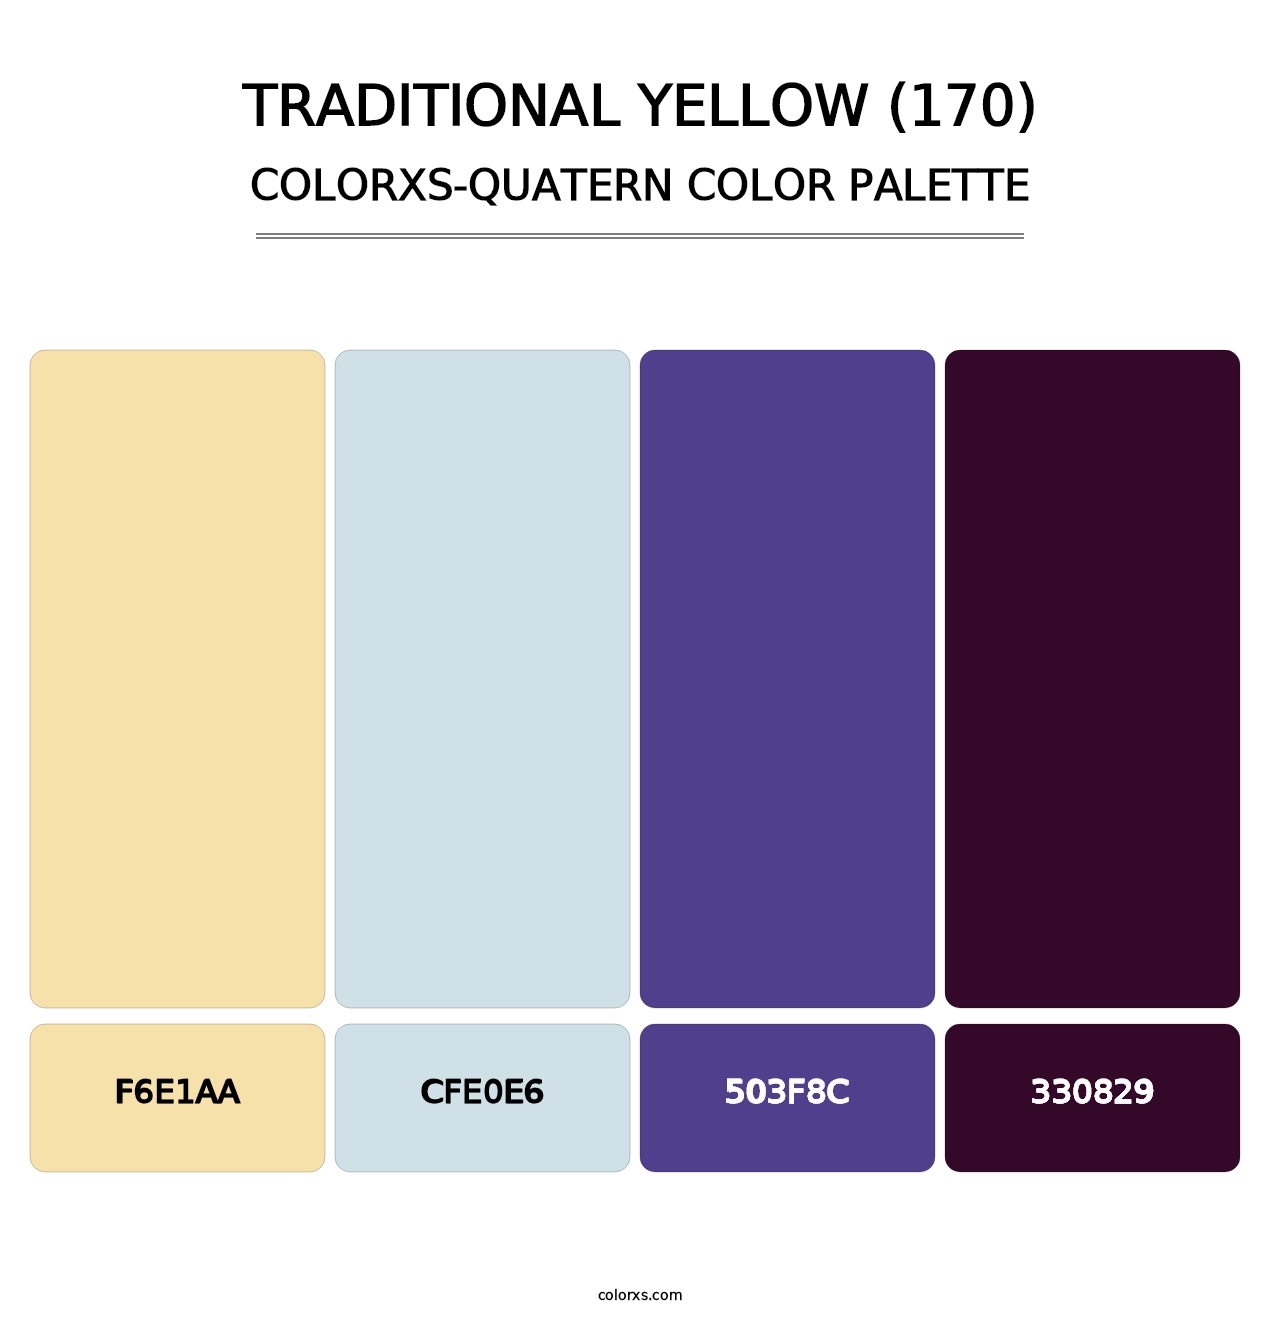 Traditional Yellow (170) - Colorxs Quatern Palette